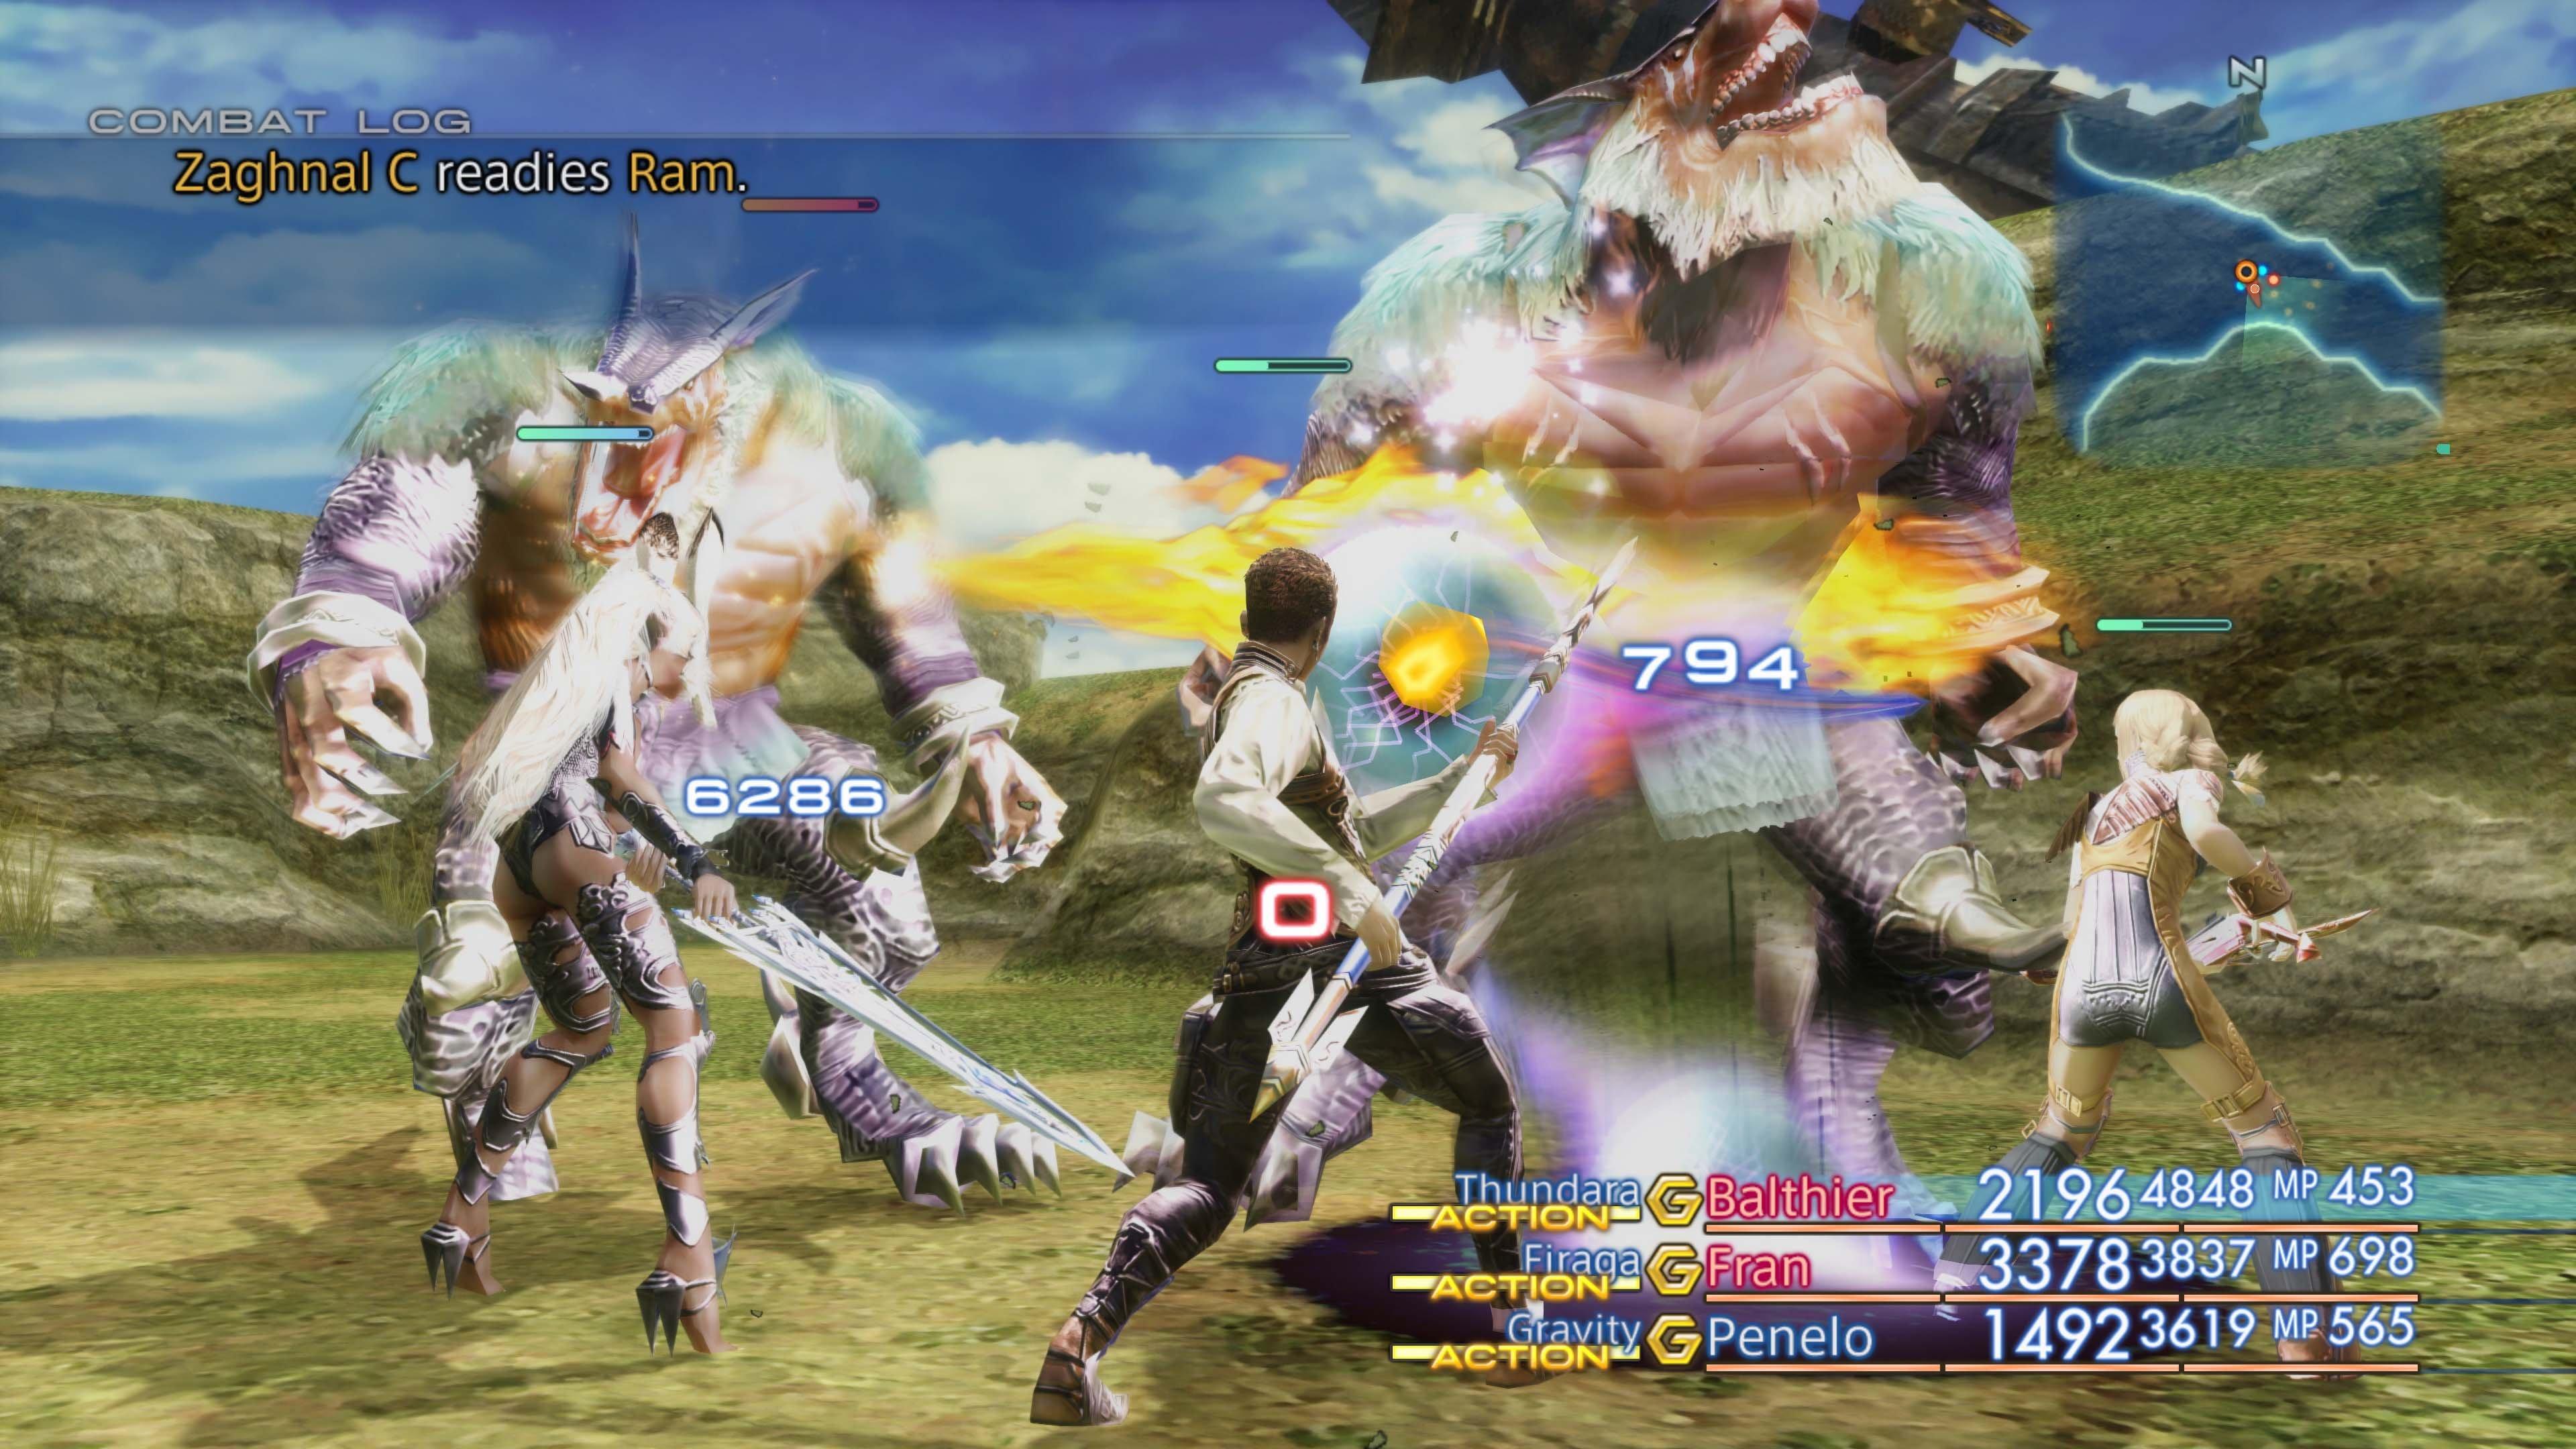 Final Fantasy 12: The Zodiac Age is coming to Nintendo Switch next